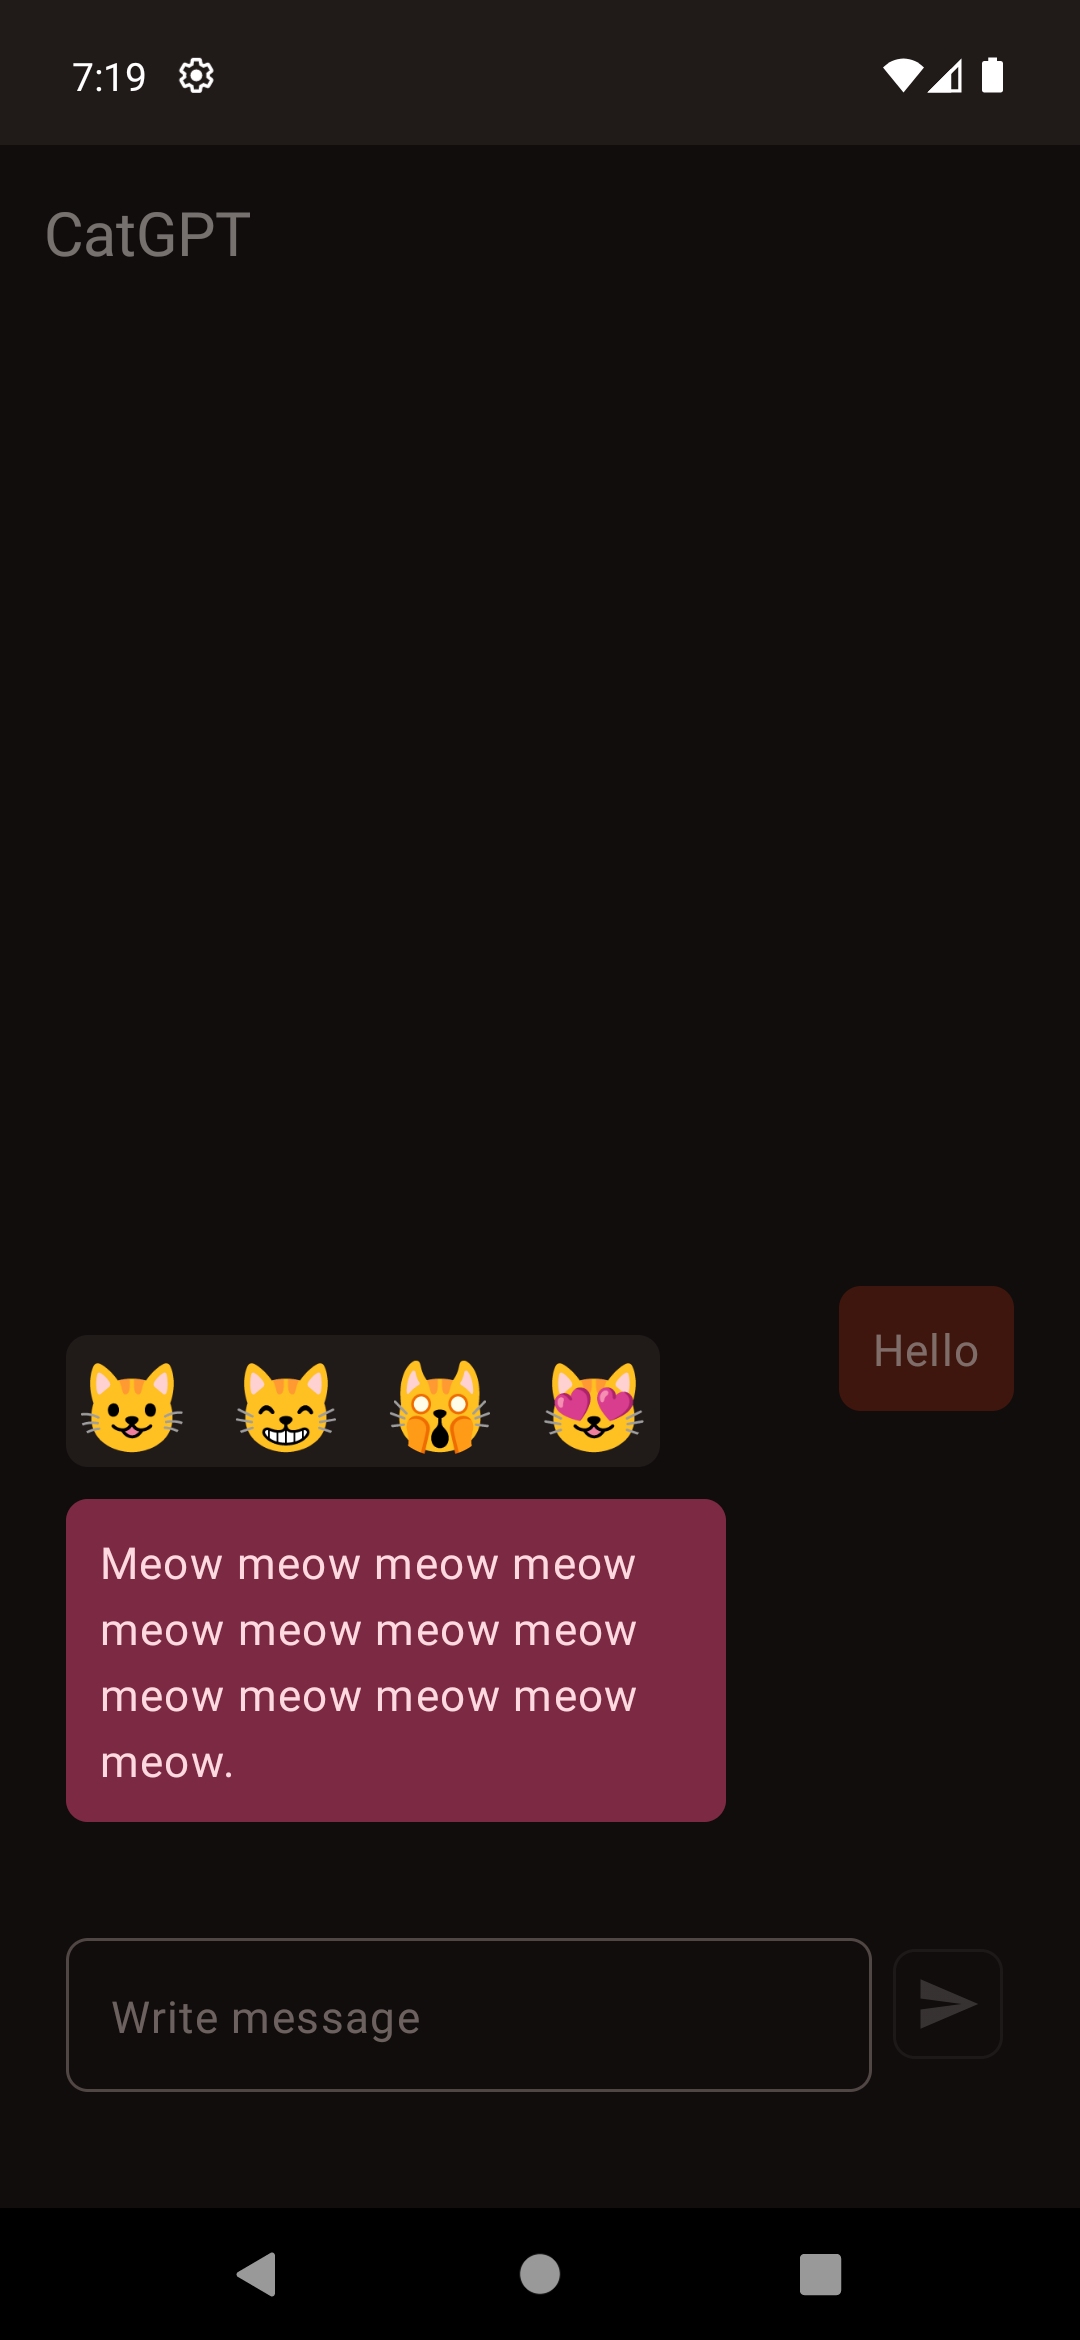 CatGPT-app with a message consisting of multiple 'meow's open. Above the message, there are four cat emojis: Grinning cat, grinning cat with smiling eyes, weary cat and smiling cat with heart eyes.